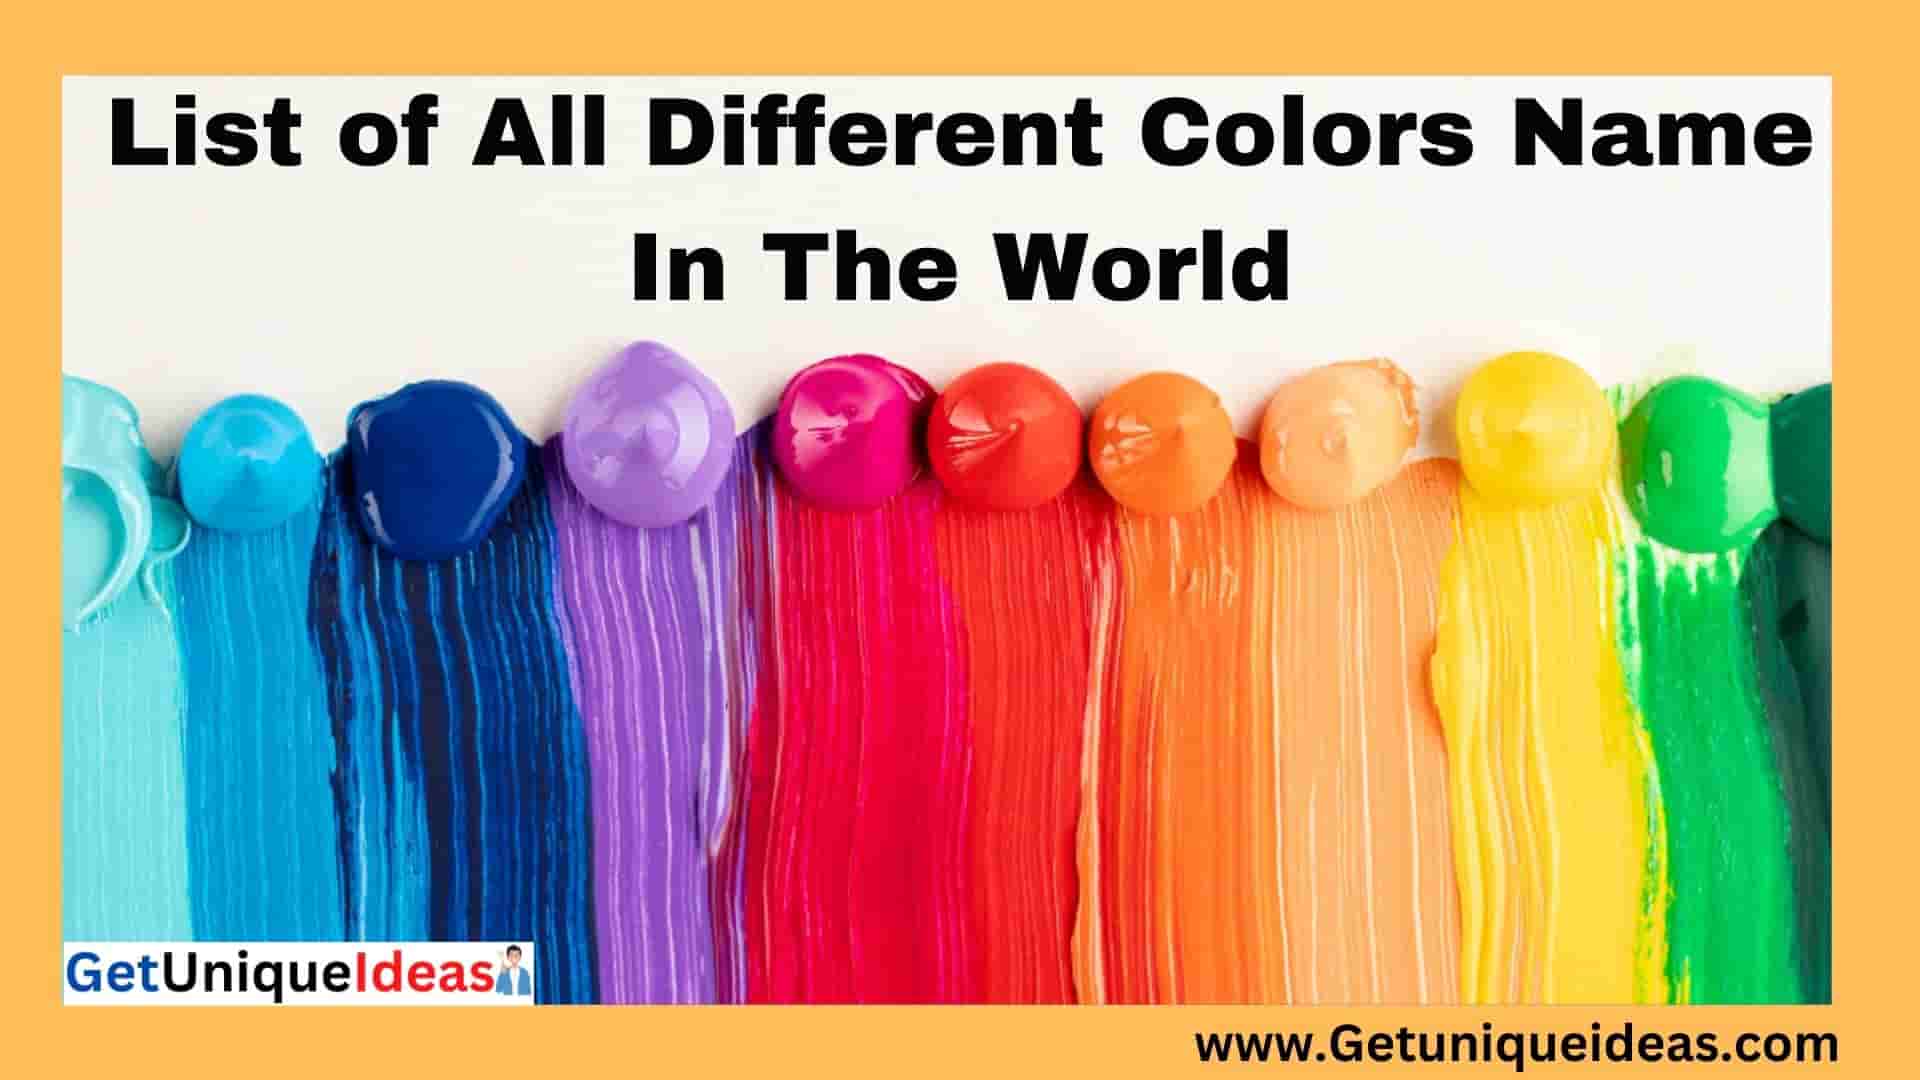 List of all different colors in the world